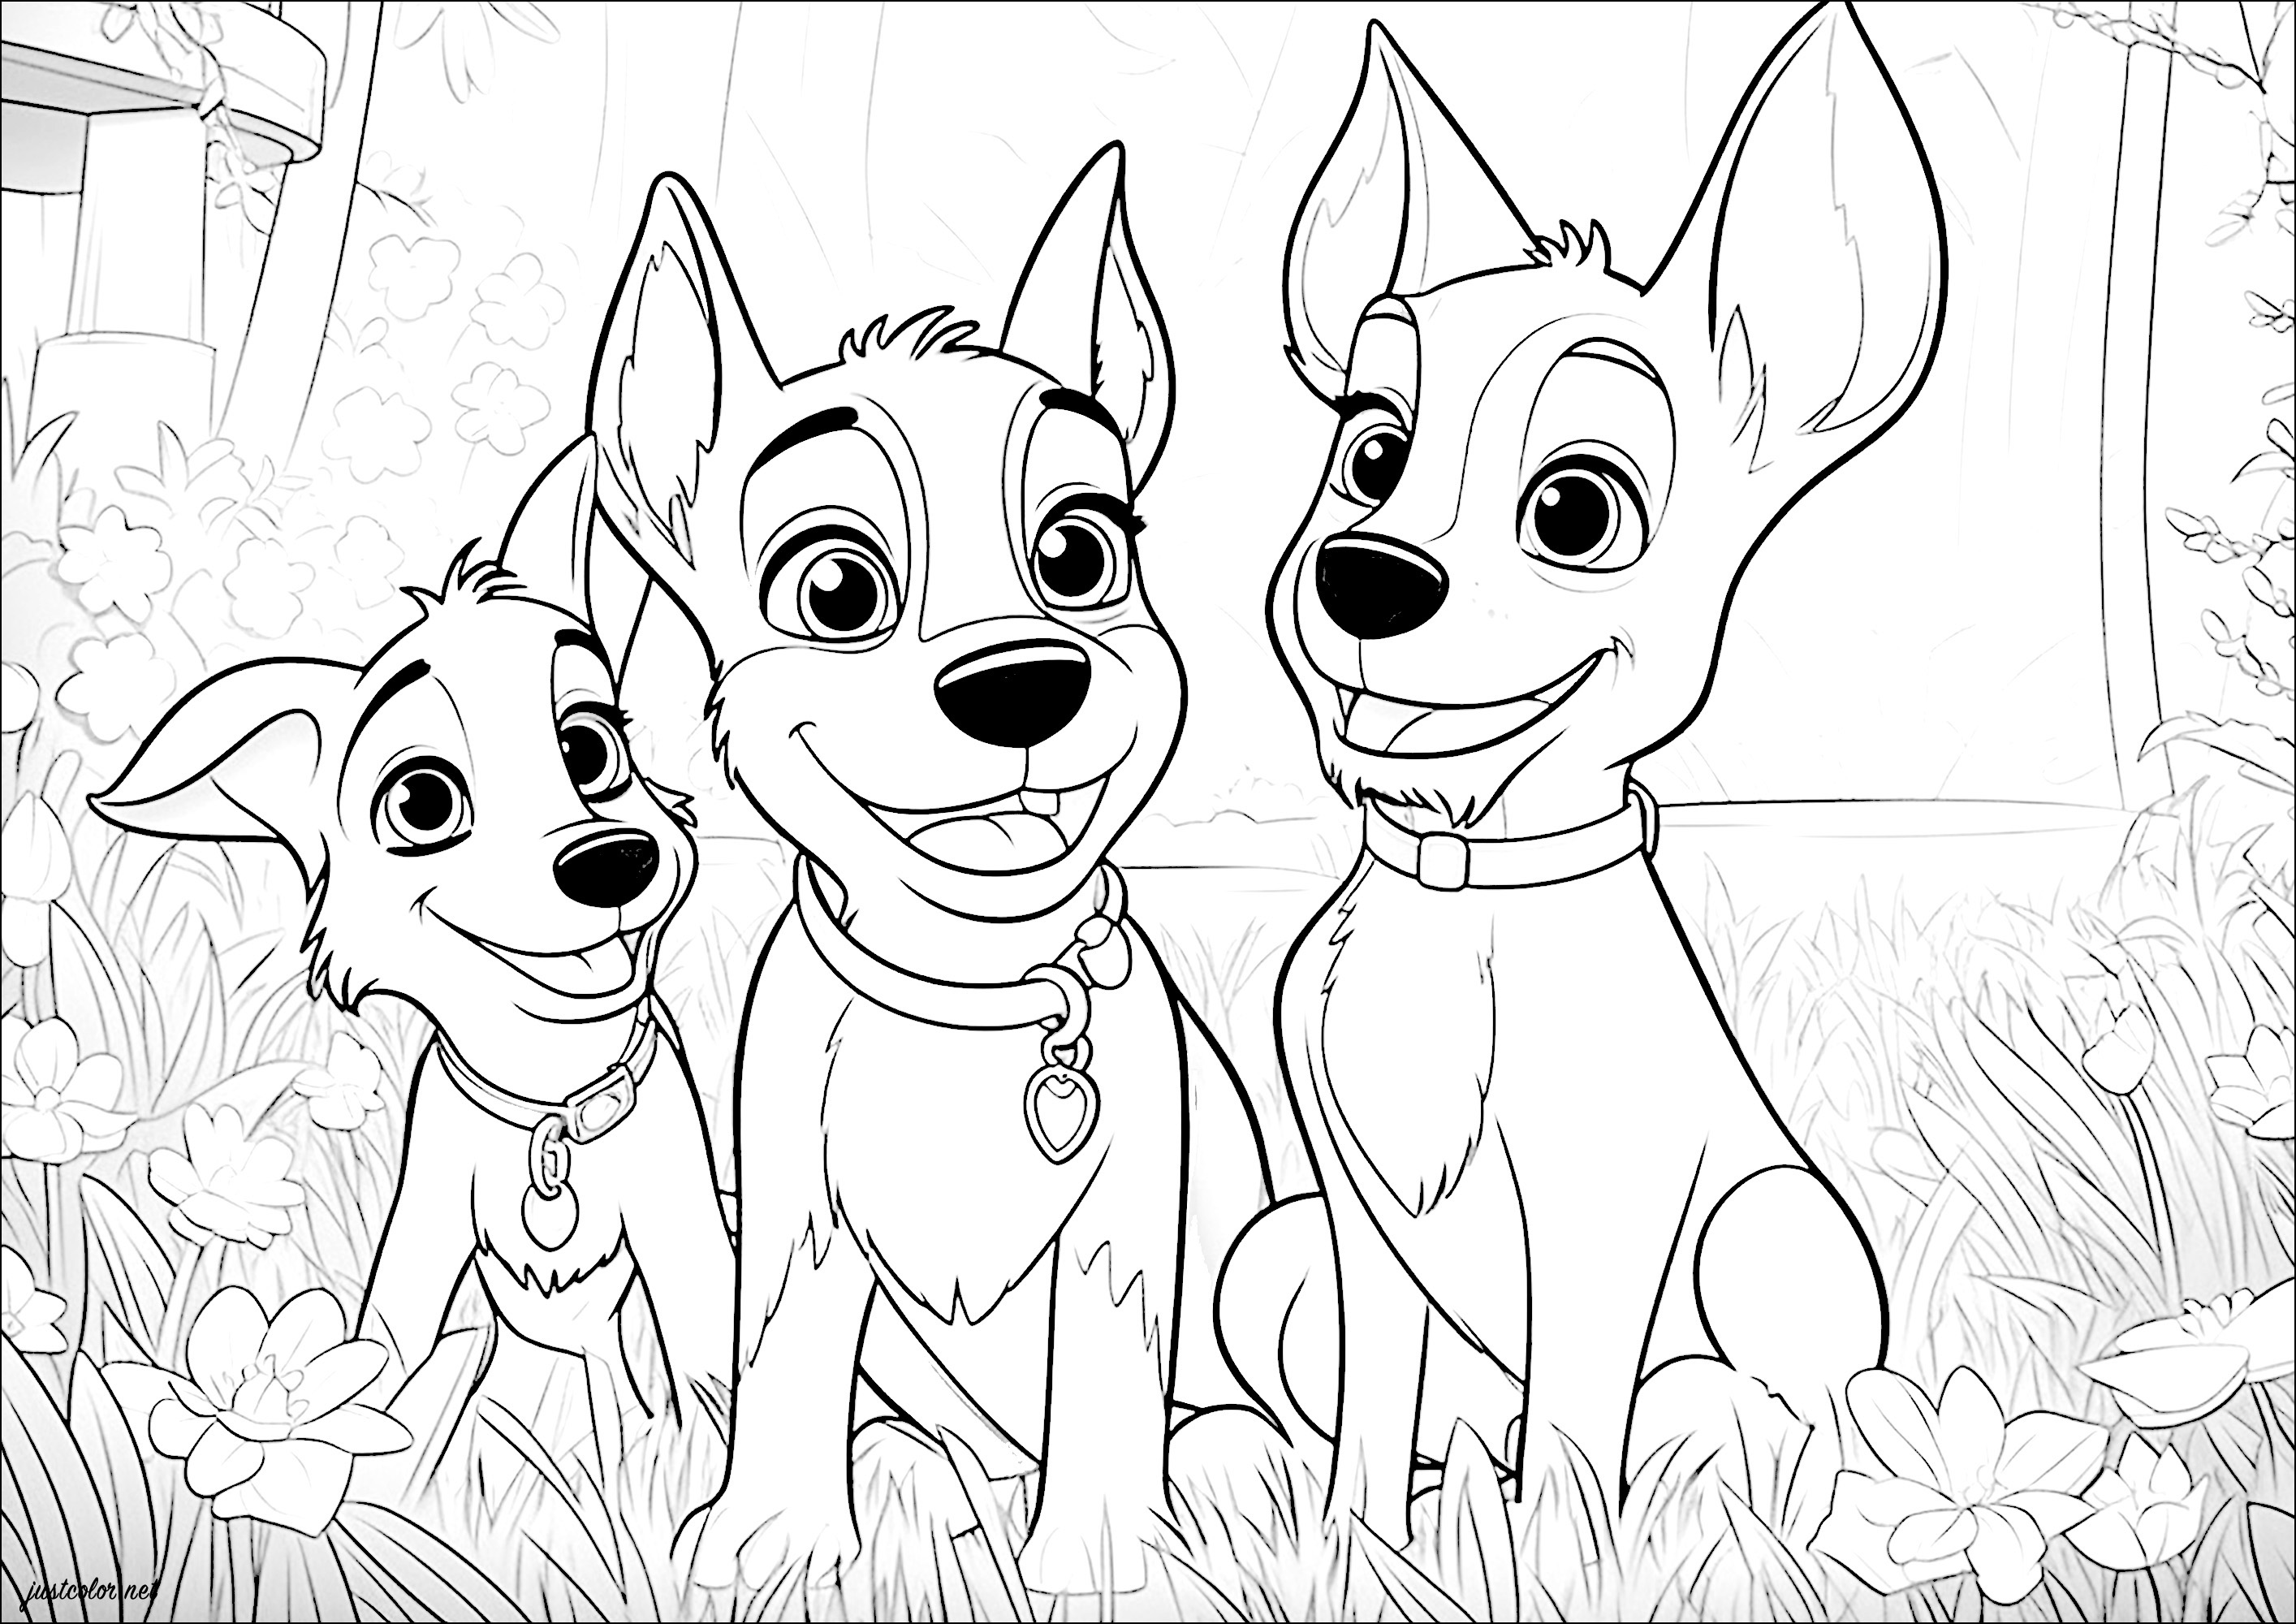 Three happy dogs in a garden. A simple coloring page of three dogs in a garden